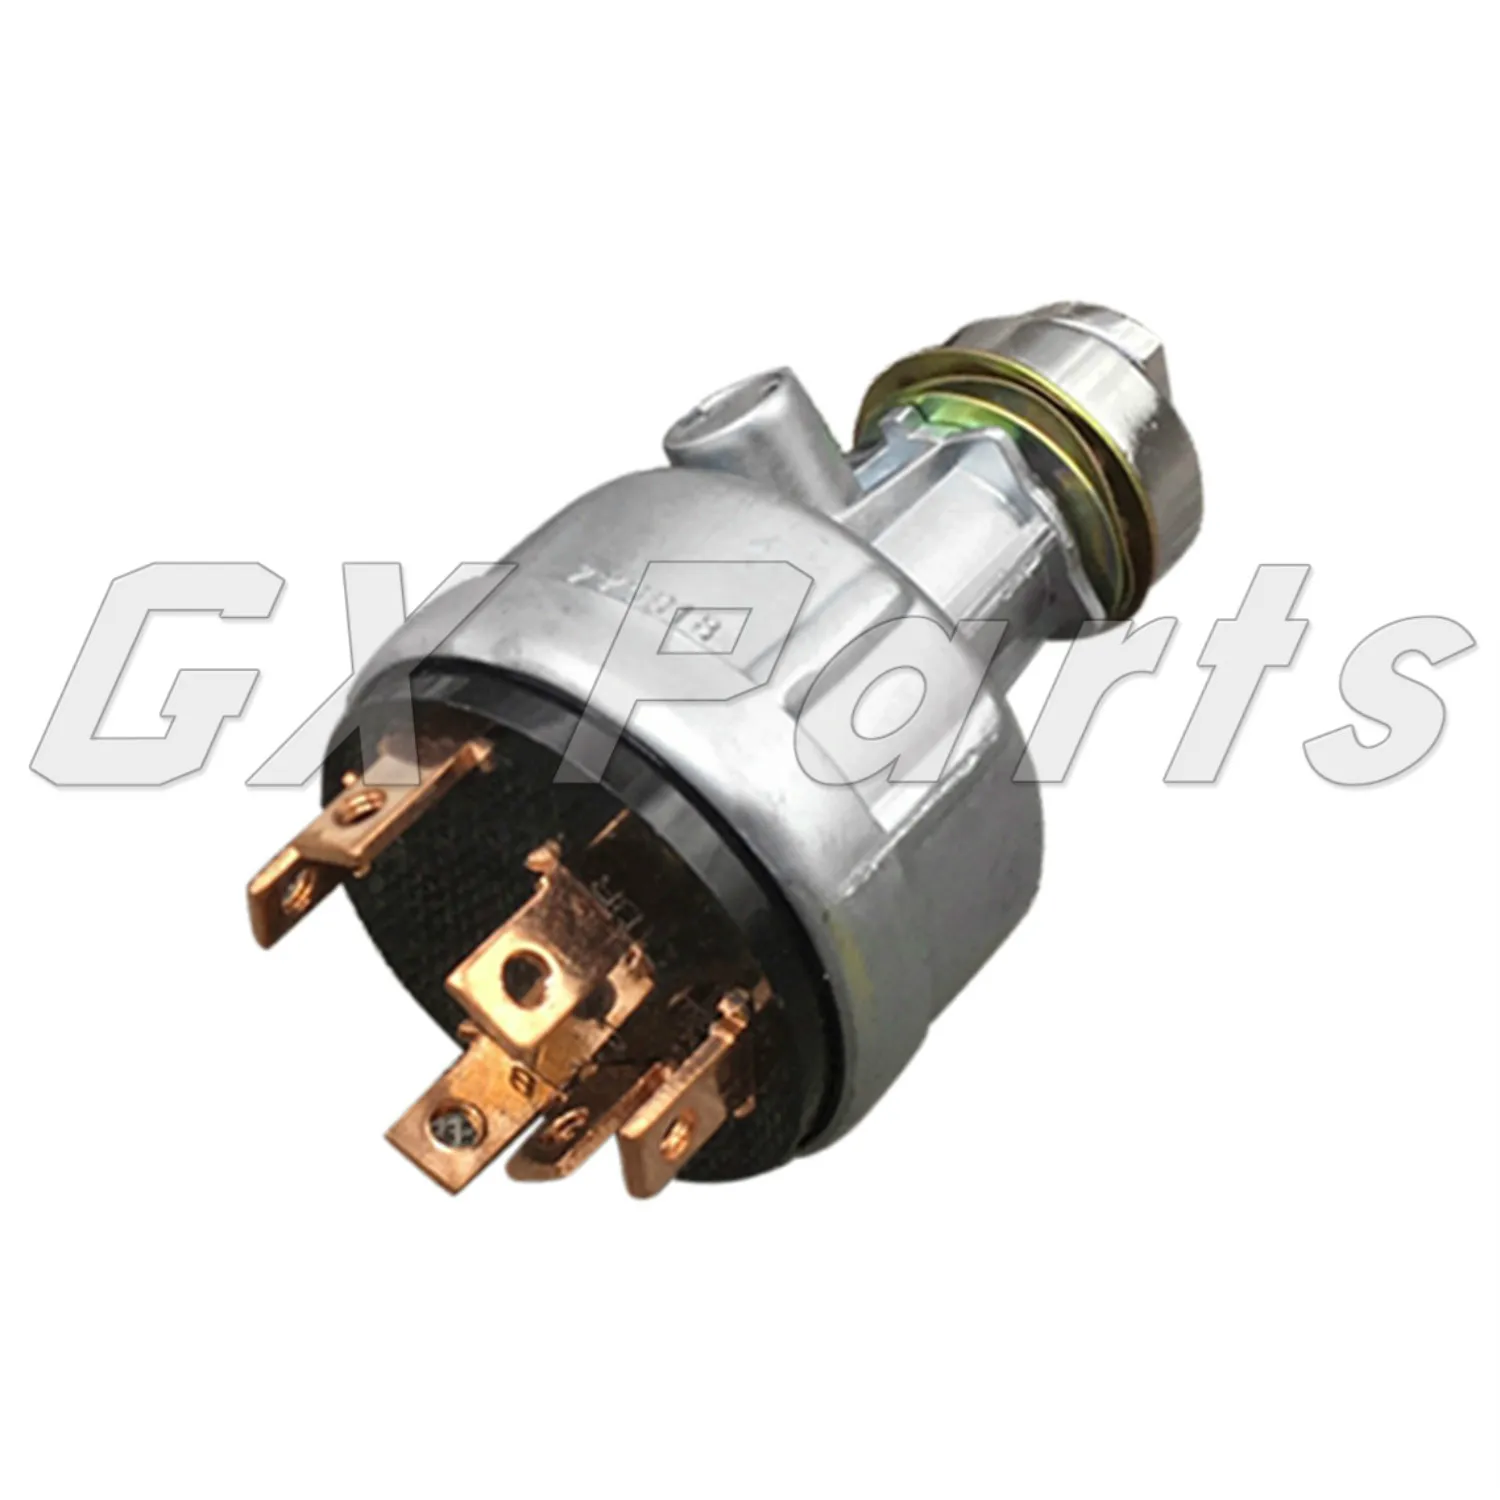 7Y3918 7Y-3918 Ignition Switch for Caterpillar 325C 314C 311-A 307C 307B 307-A 308C 315BL 